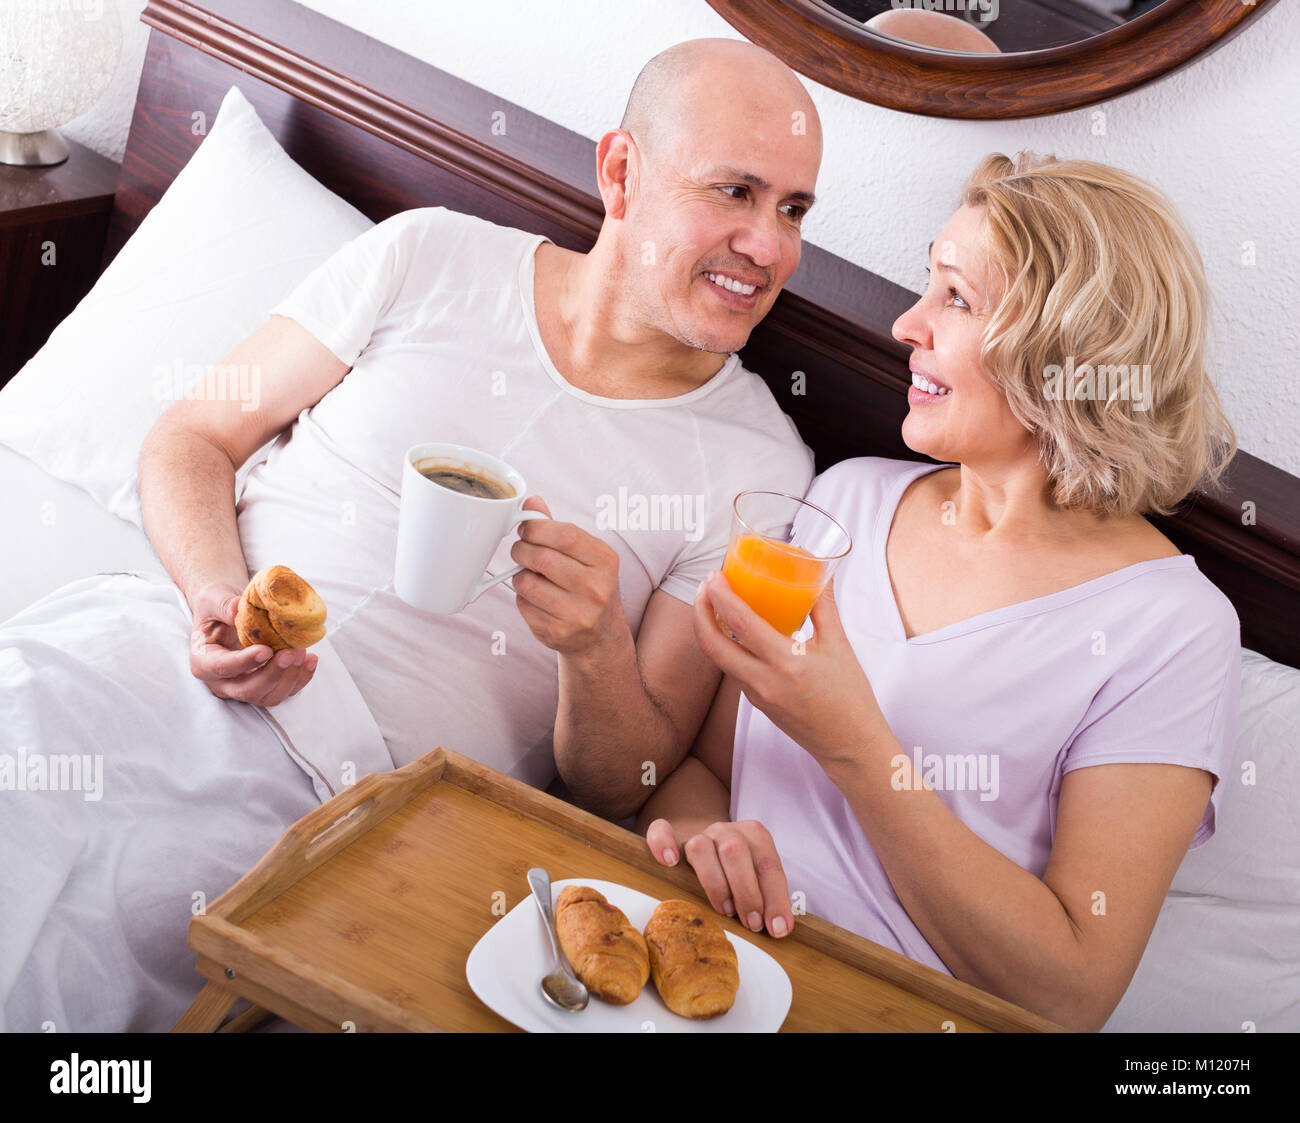 Mature adults 50-60 years old posing with coffee and pastry for breakfast Stock Photo